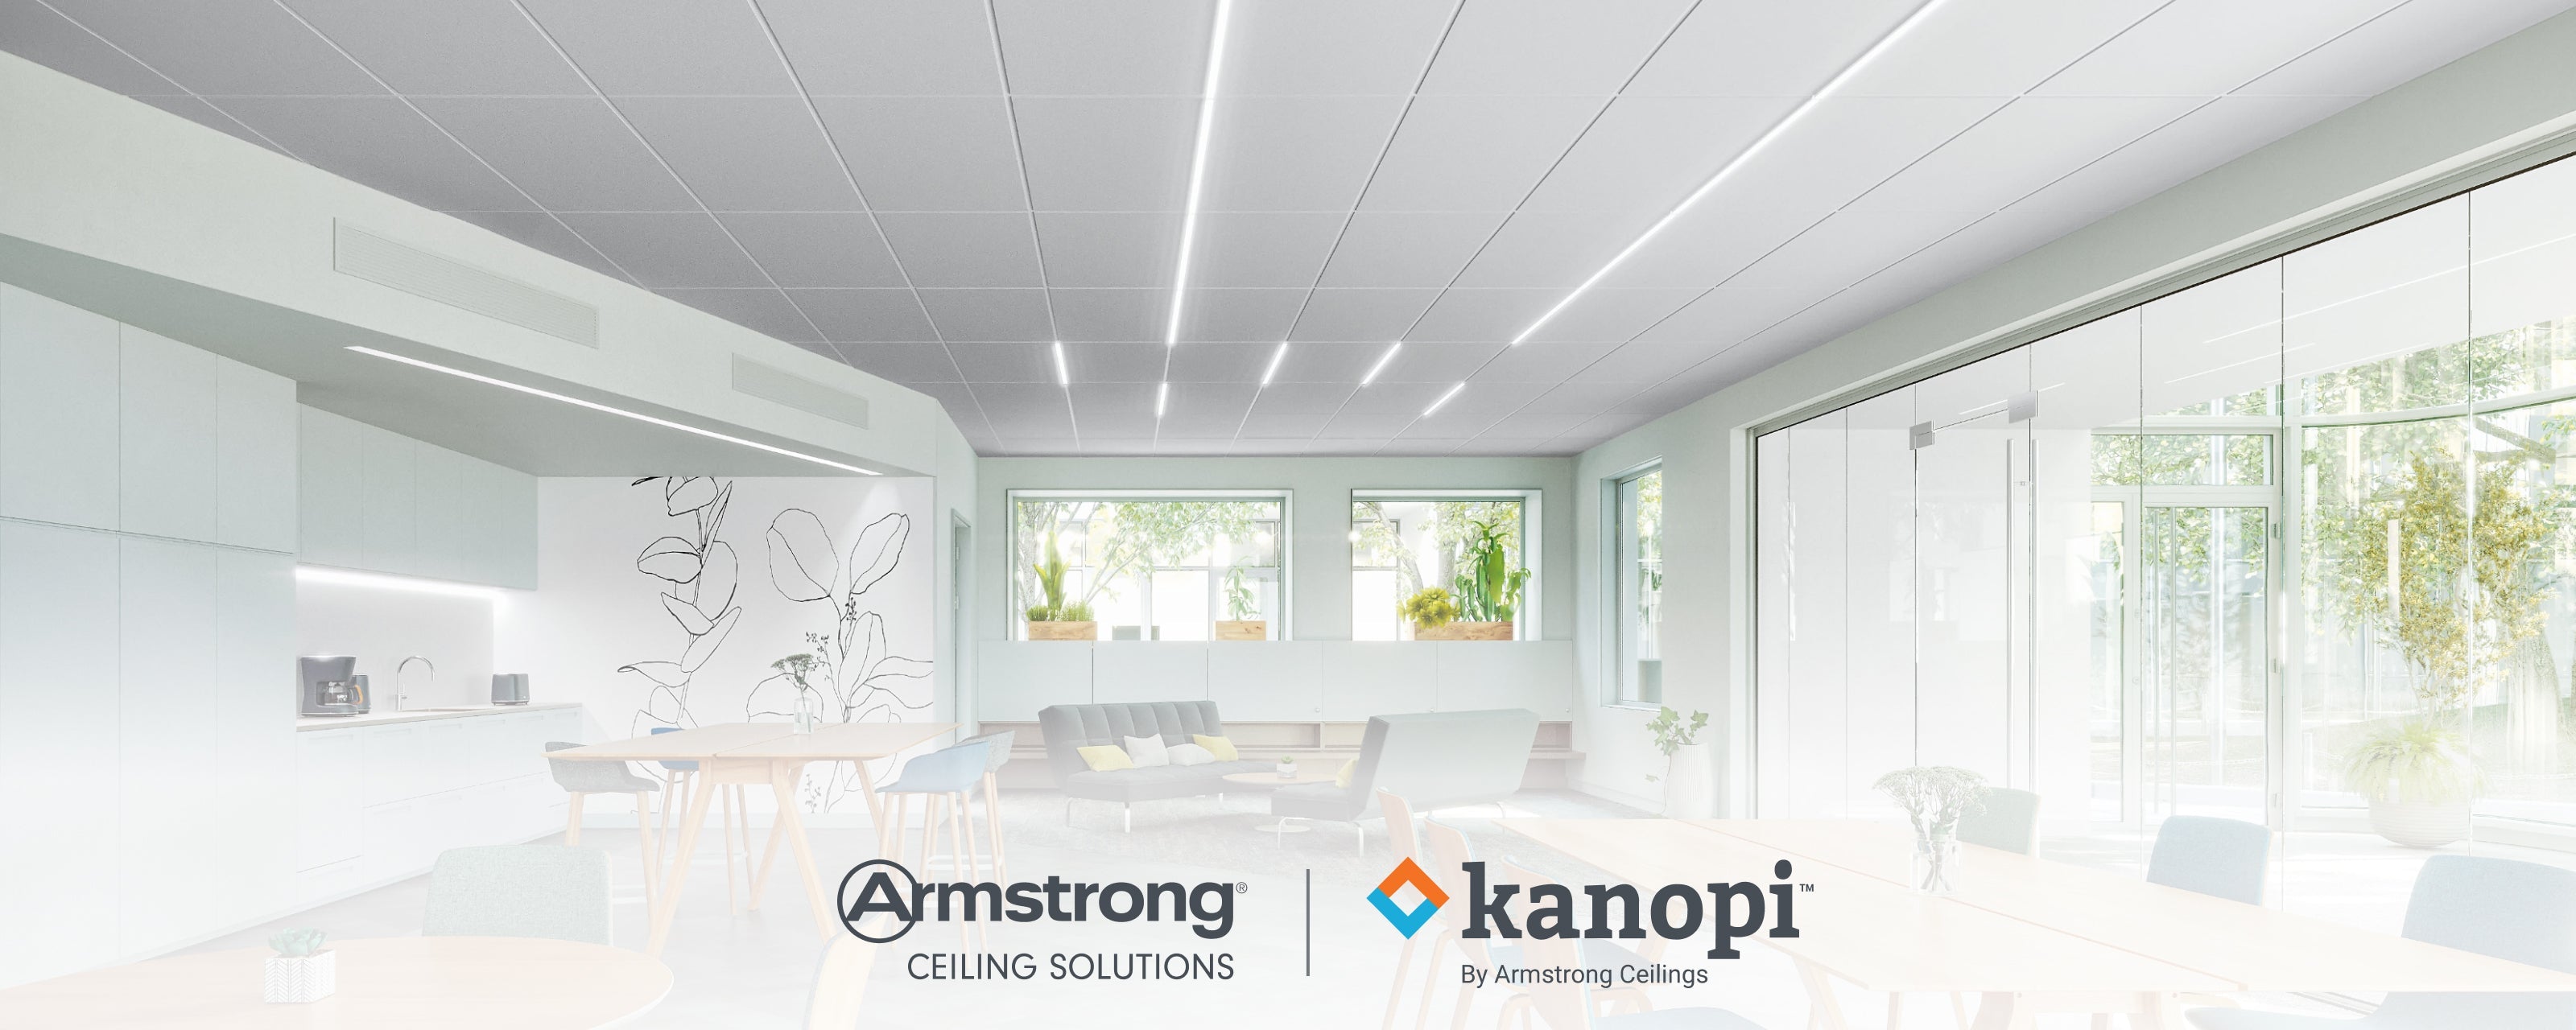 Armstrong Ceilings and Kanopi